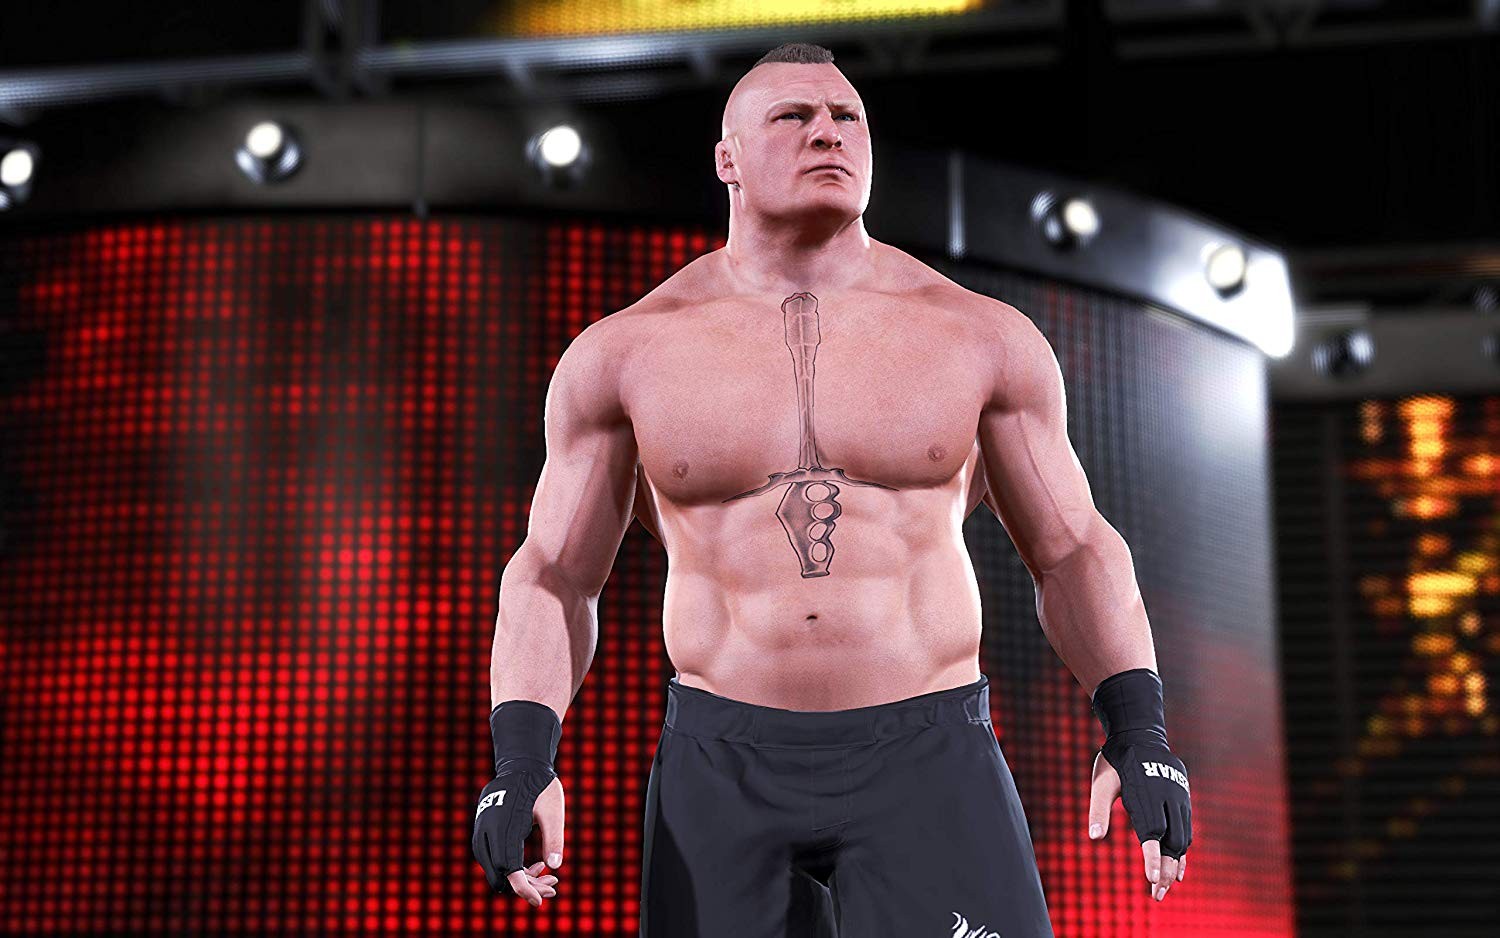 wwe 2k20, wwe game, ps4, playstation,xone, xbox one,us,north america Au, australia, Asia, eu, europe release date, gameplay, features, price, pre-order,2k sports, visual concepts